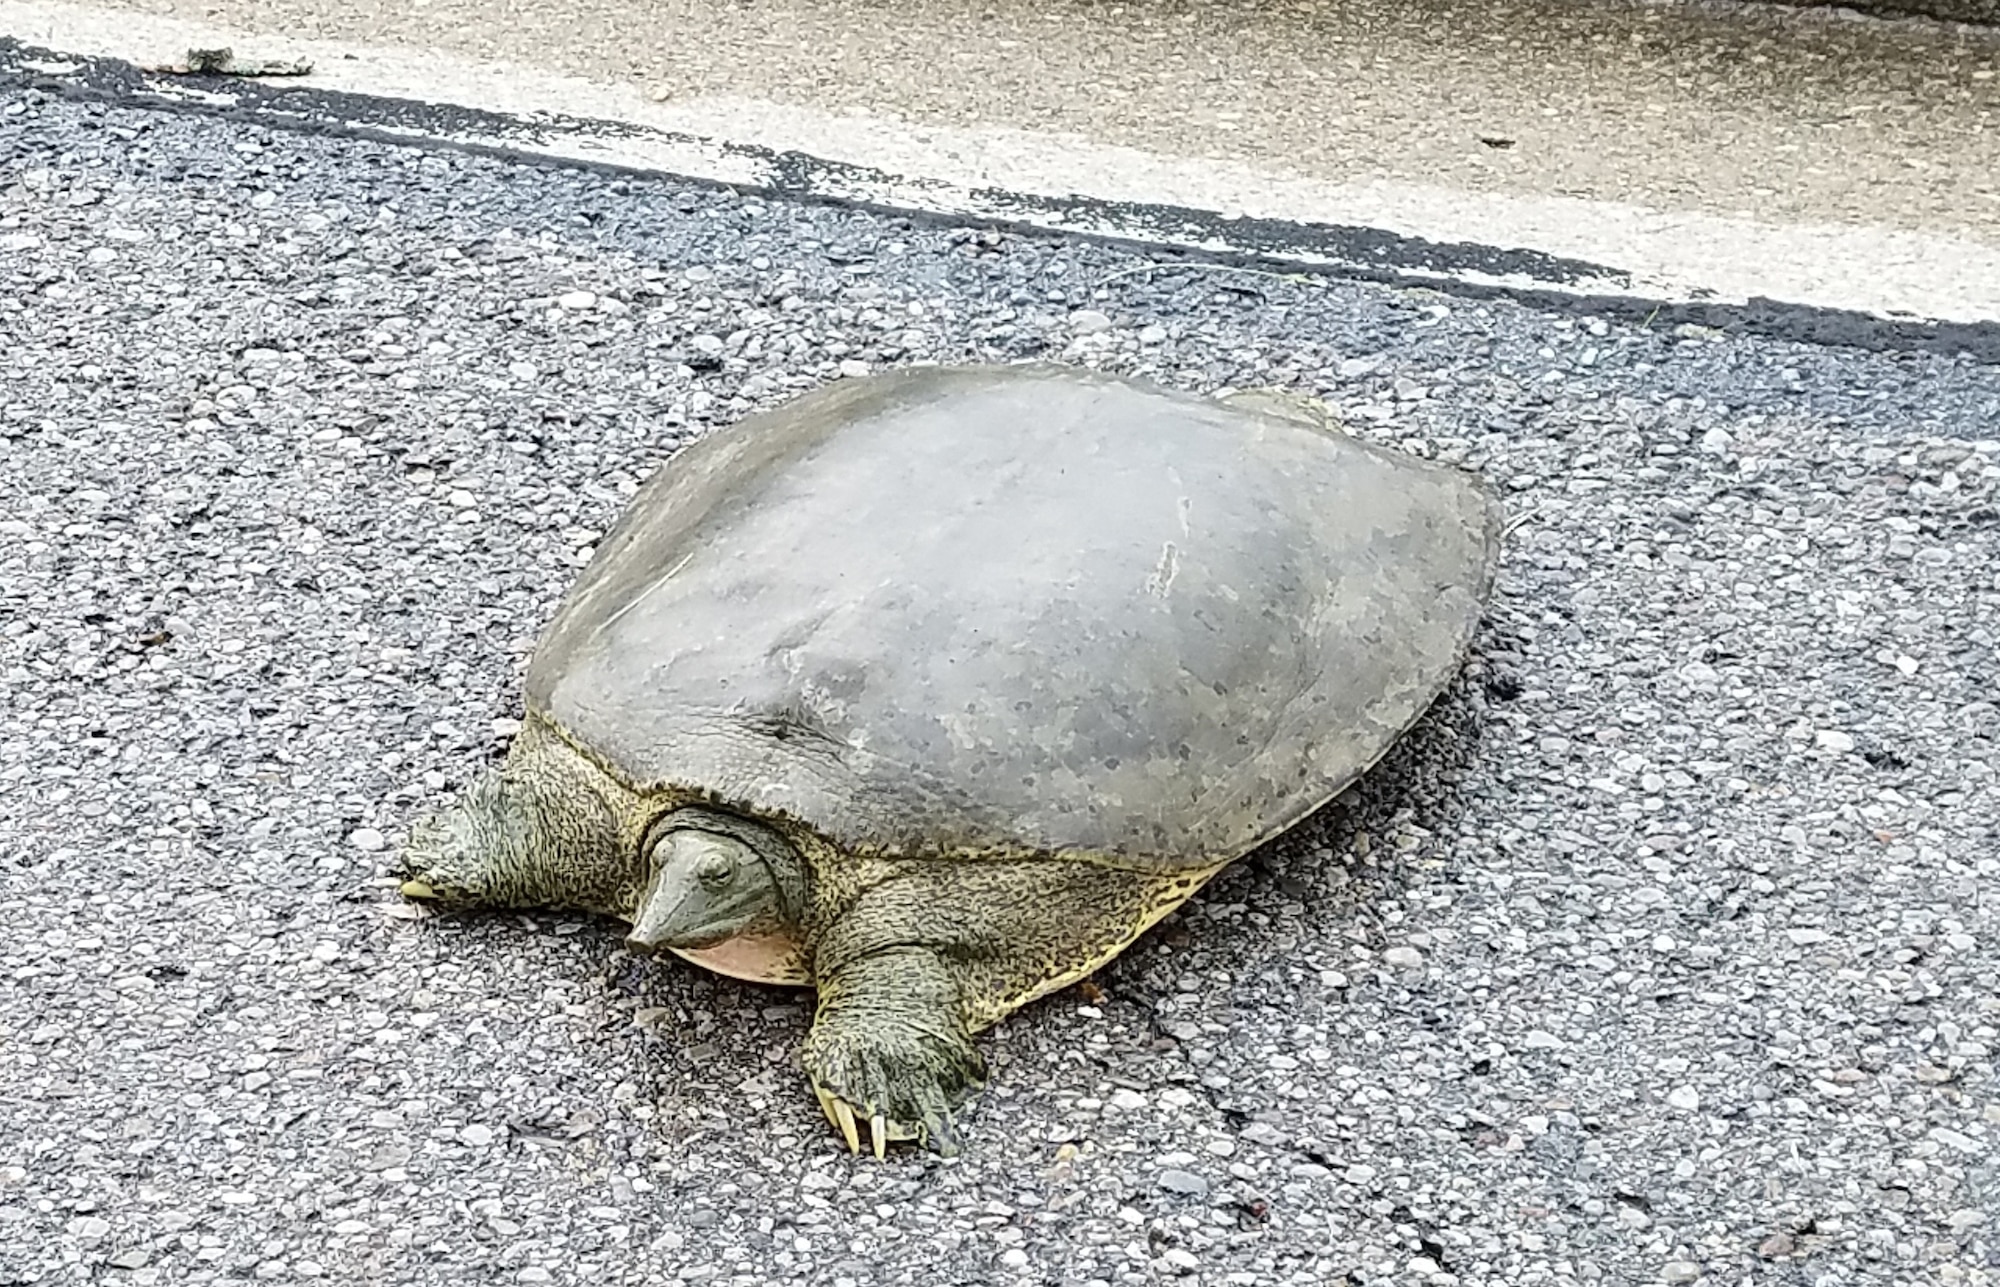 This Eastern Spiny softshell turtle was crossing the street to the golf course on Spruce Way. (U.S. Air Force photo/Laura McGowan)